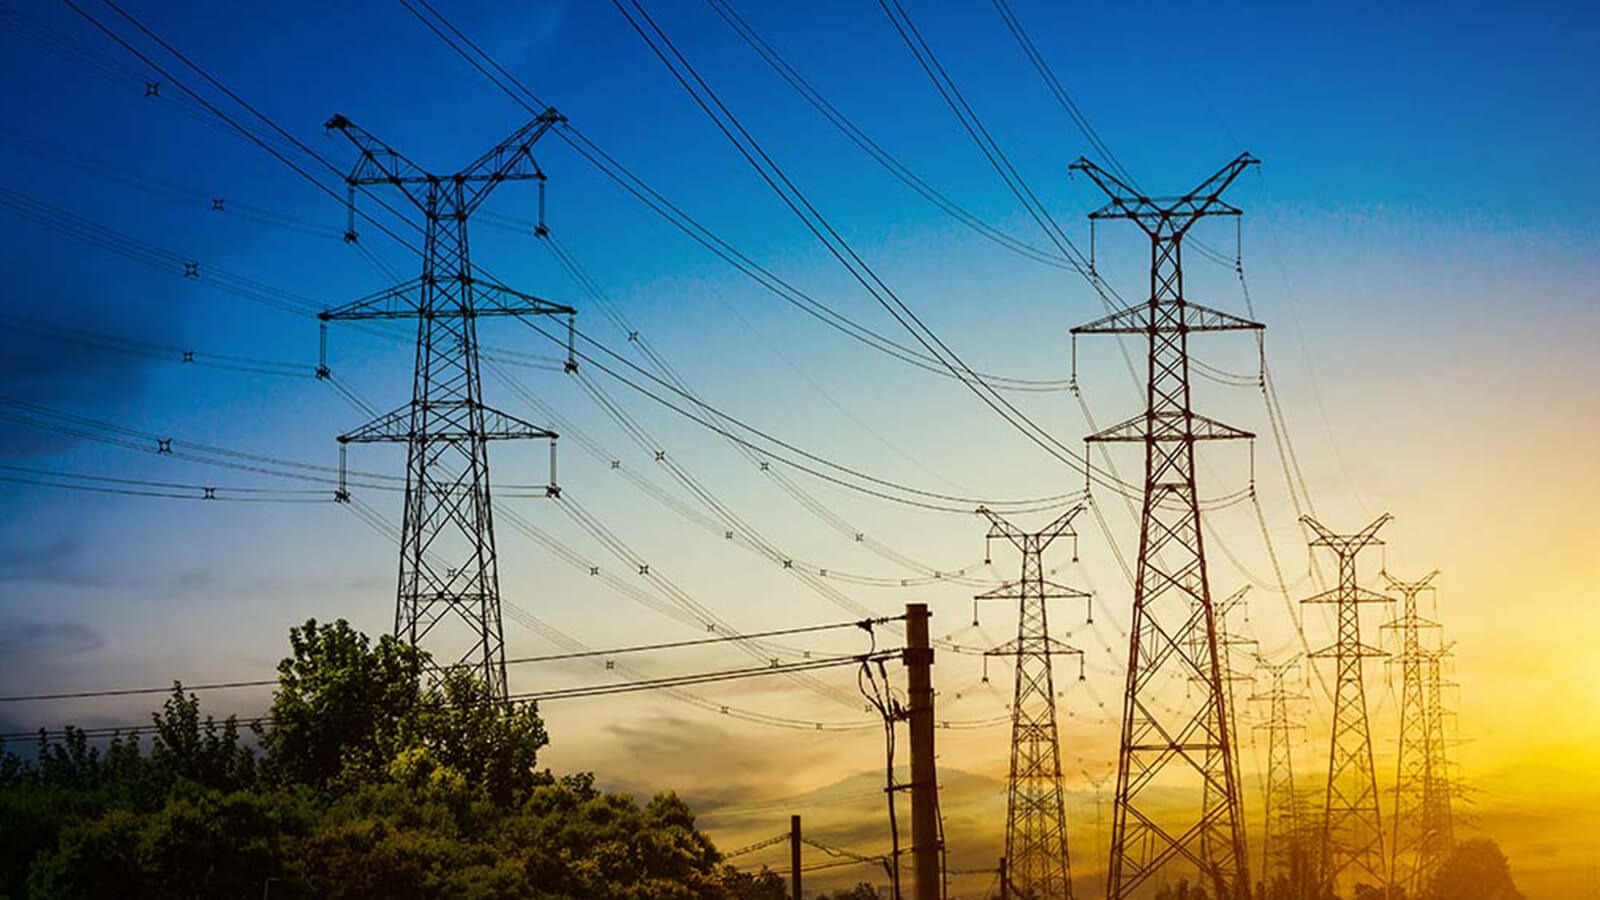 The impact of Digital Transformation in Energy and Utilities industries